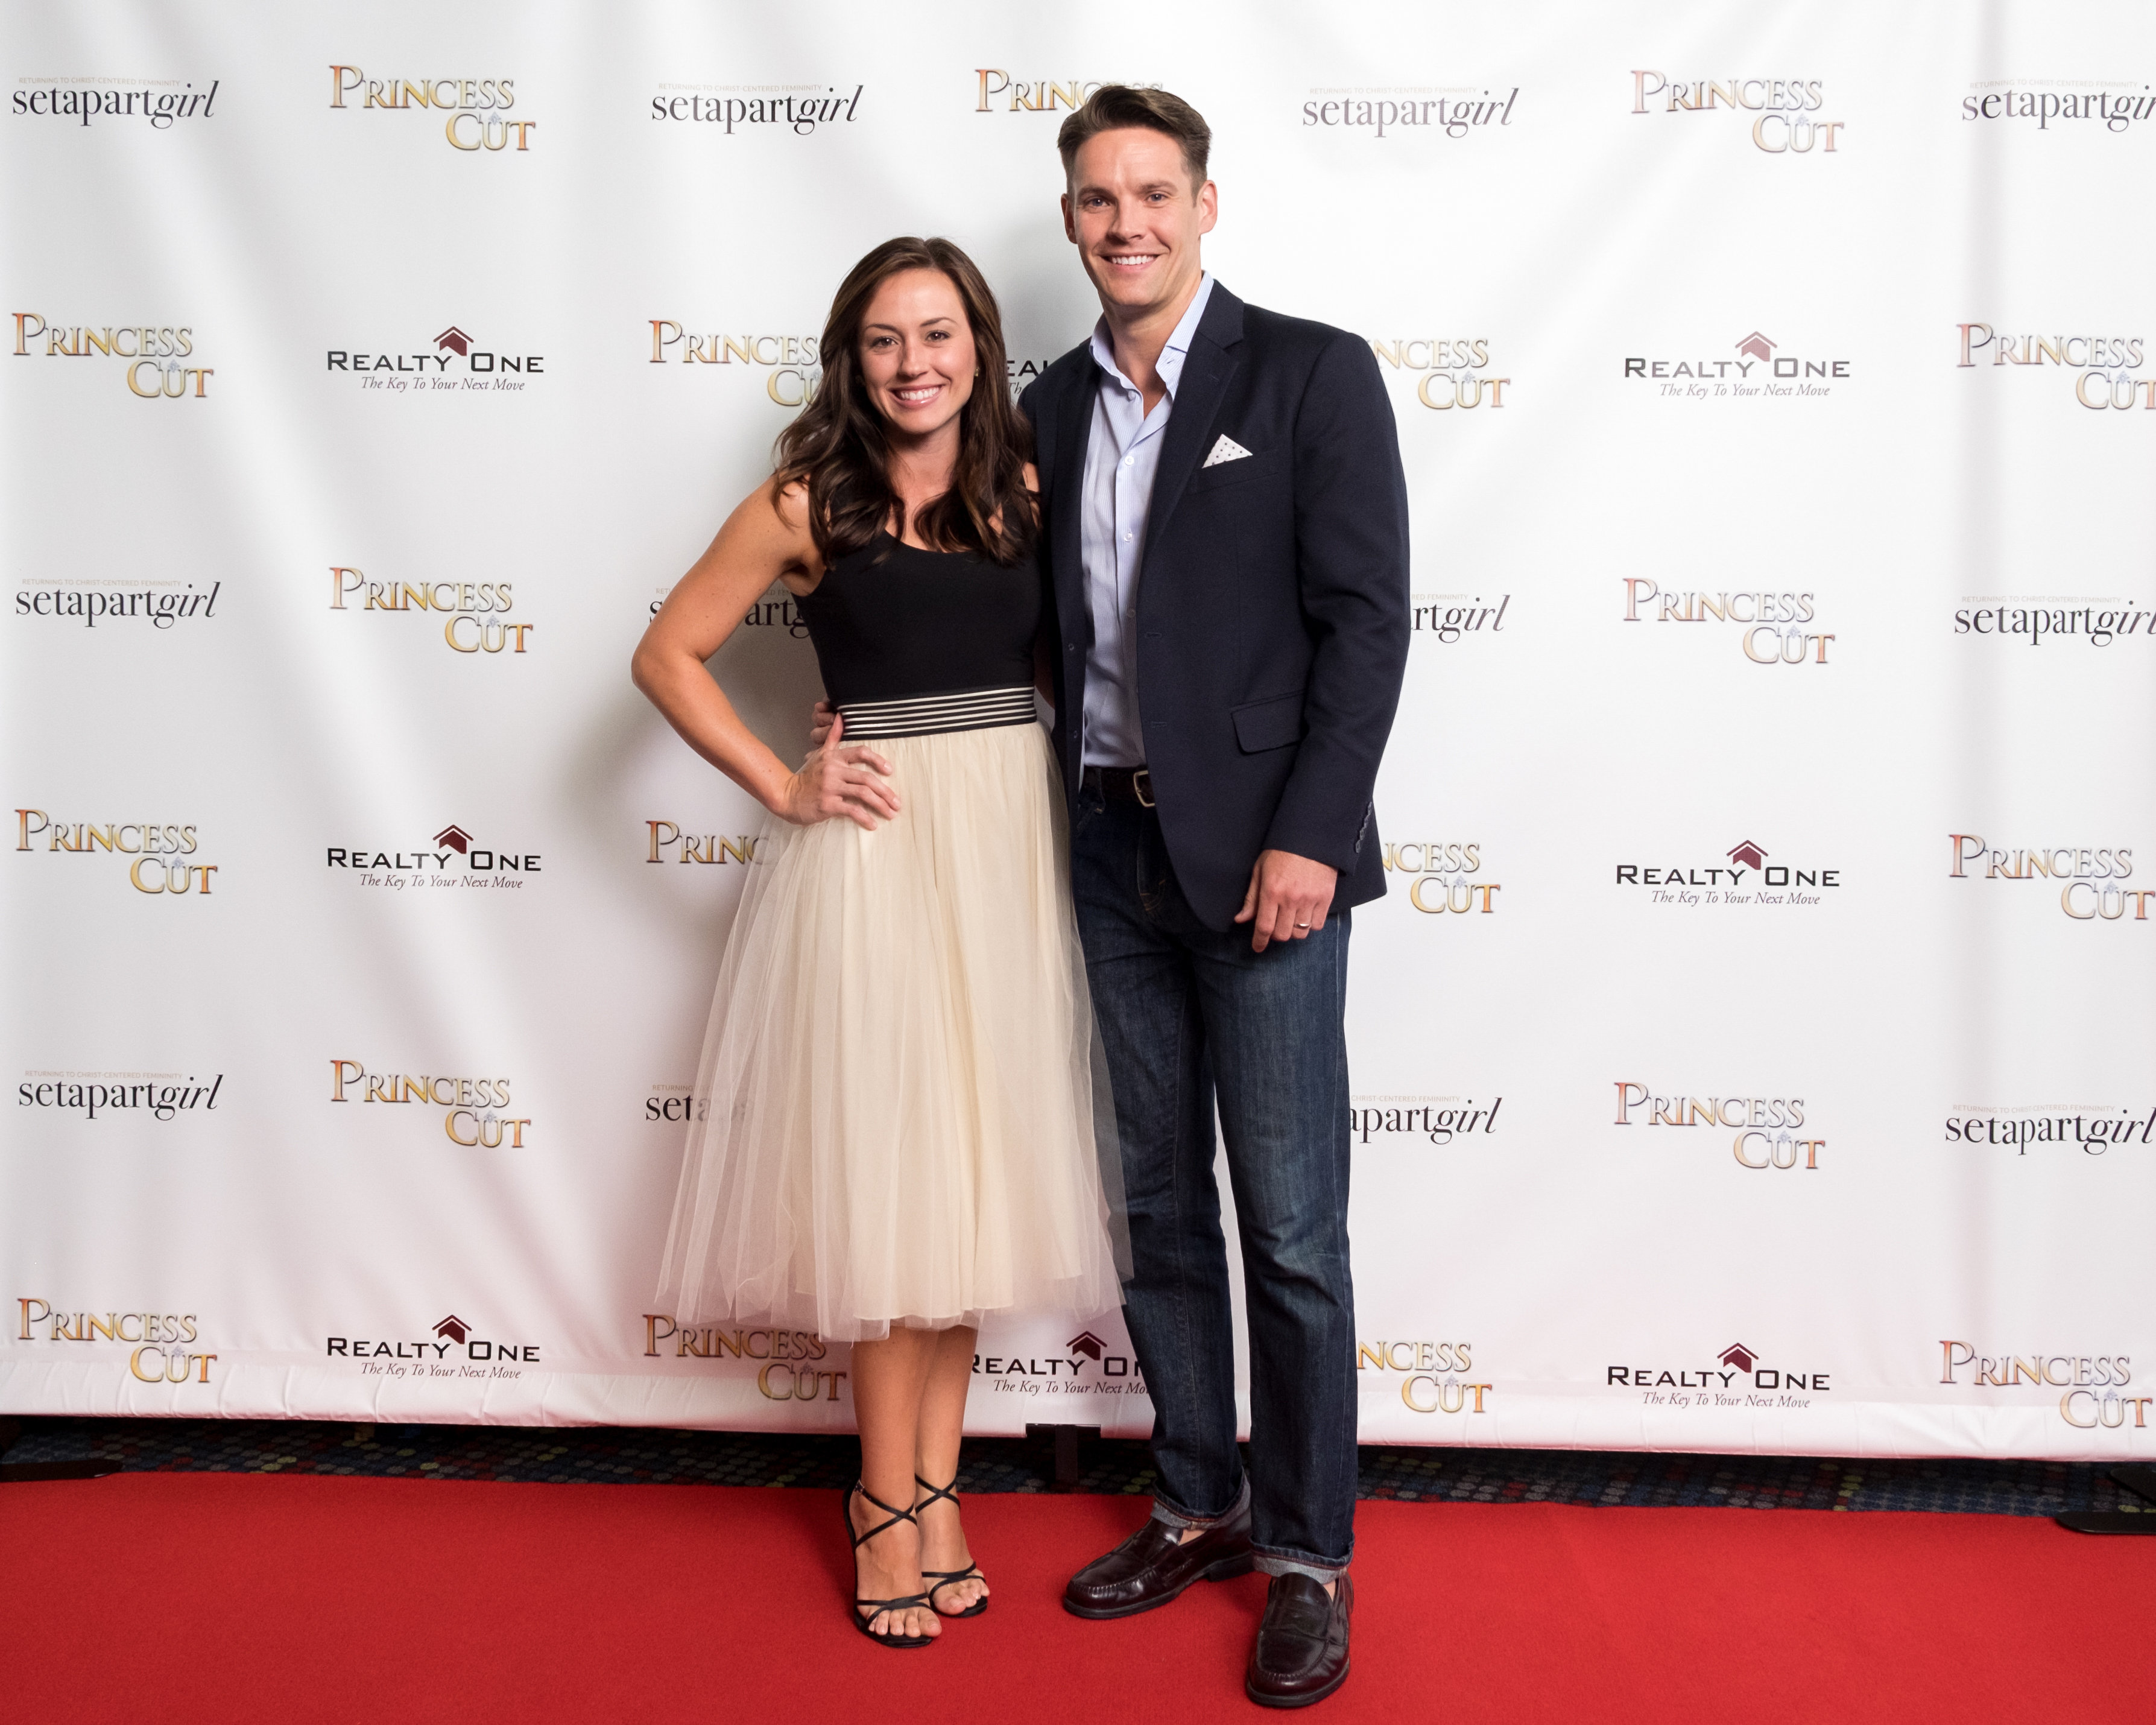 Ashley Bratcher and Joseph Gray at an event for Princess Cut (2015).